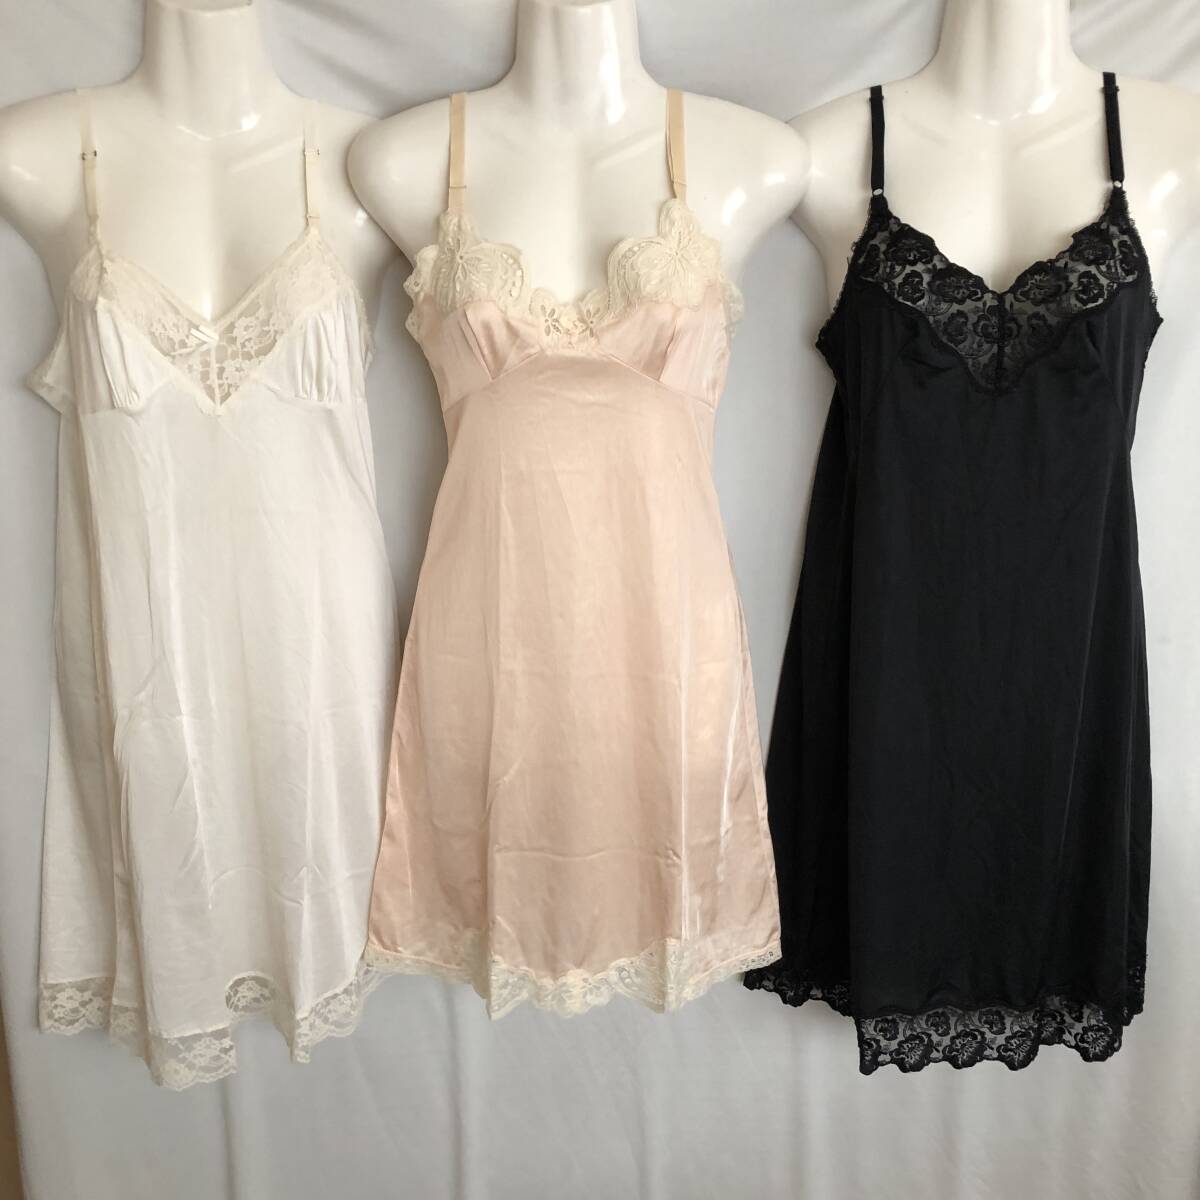 SX-636☆♪The SUBROSA & D-OS1030 & C-OS2036 Pretty Sisters Lingerie colletion ♪☆ エレガンススリップ　3点　Mサイズ（B80cm丈90cm)_画像1